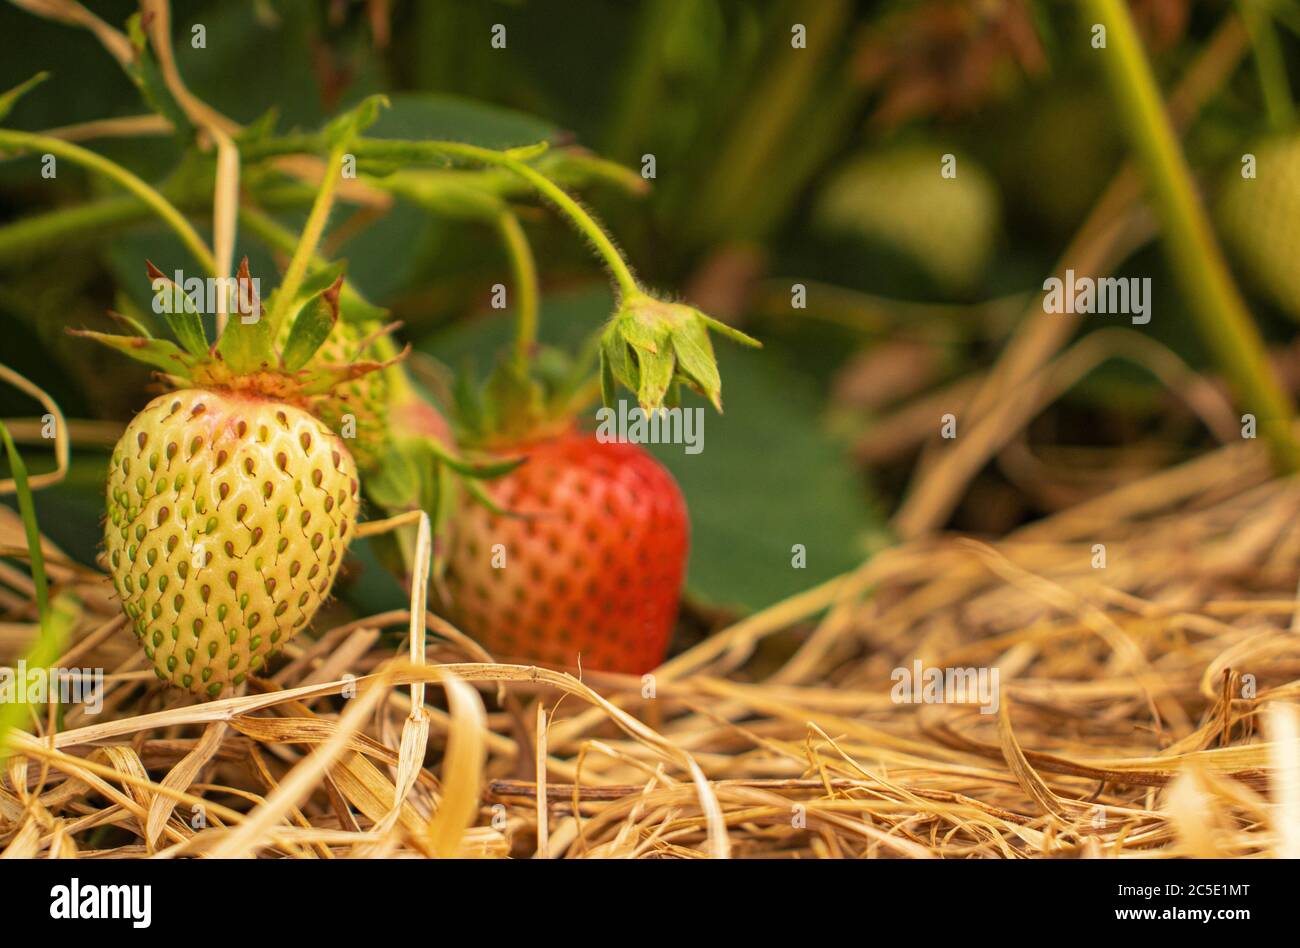 Closeup of two strawberries, Fragaria ananassa, one ripe and one unripe in a Strawberry Field Outside McClure, Central Pennsylvania, during the Spring Stock Photo